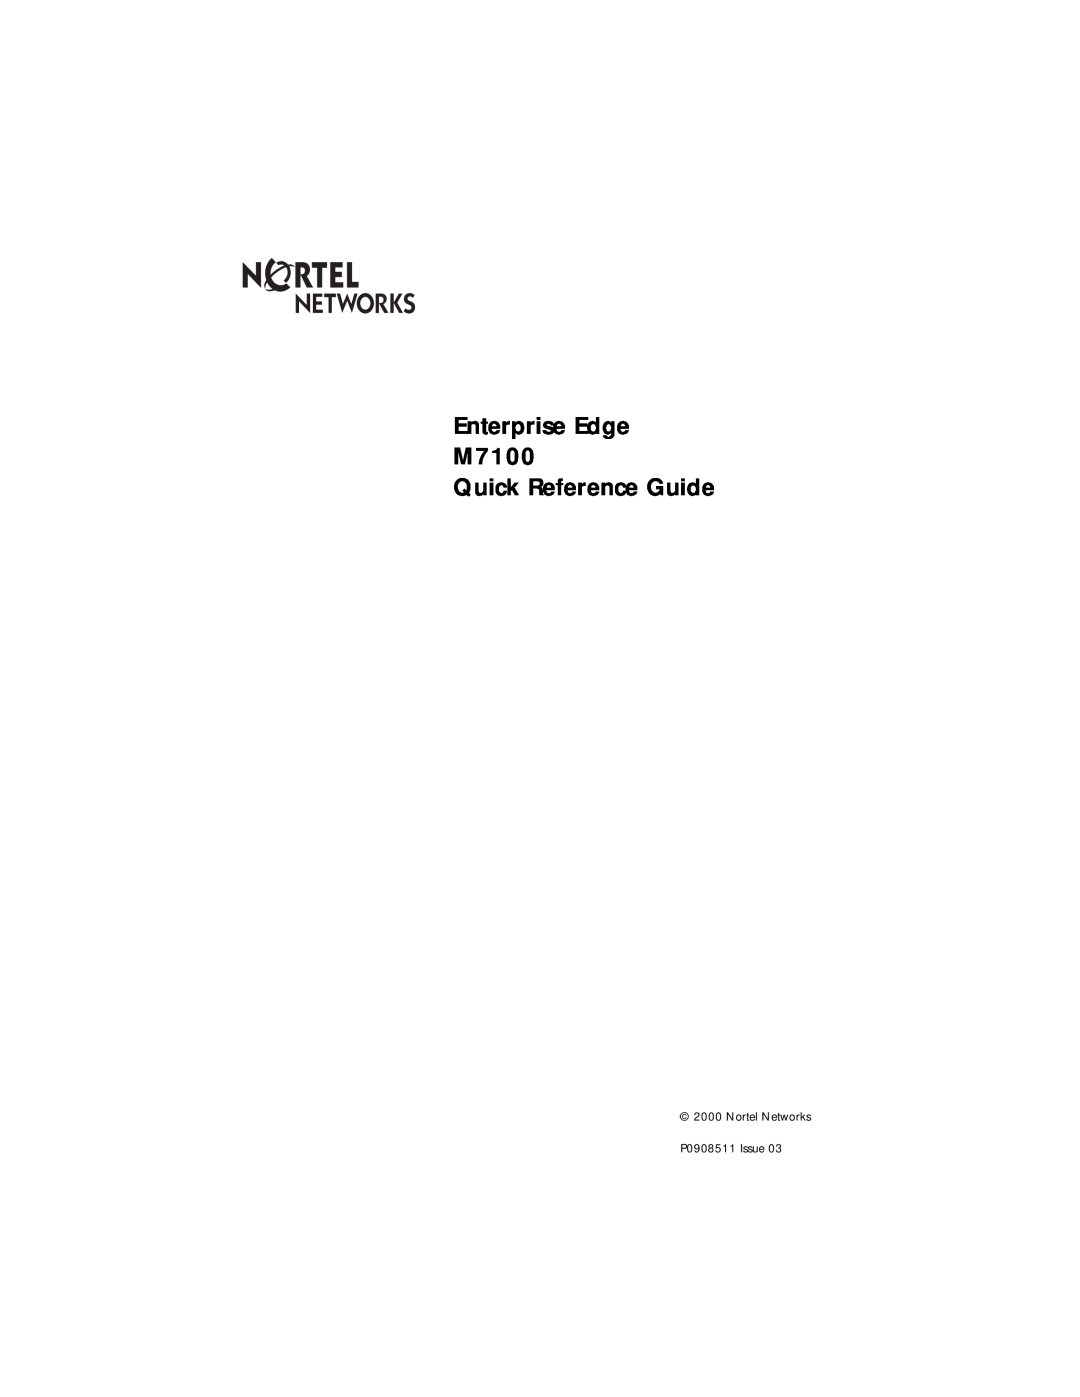 Panasonic manual Enterprise Edge M7100 Quick Reference Guide, Nortel Networks P0908511 Issue 